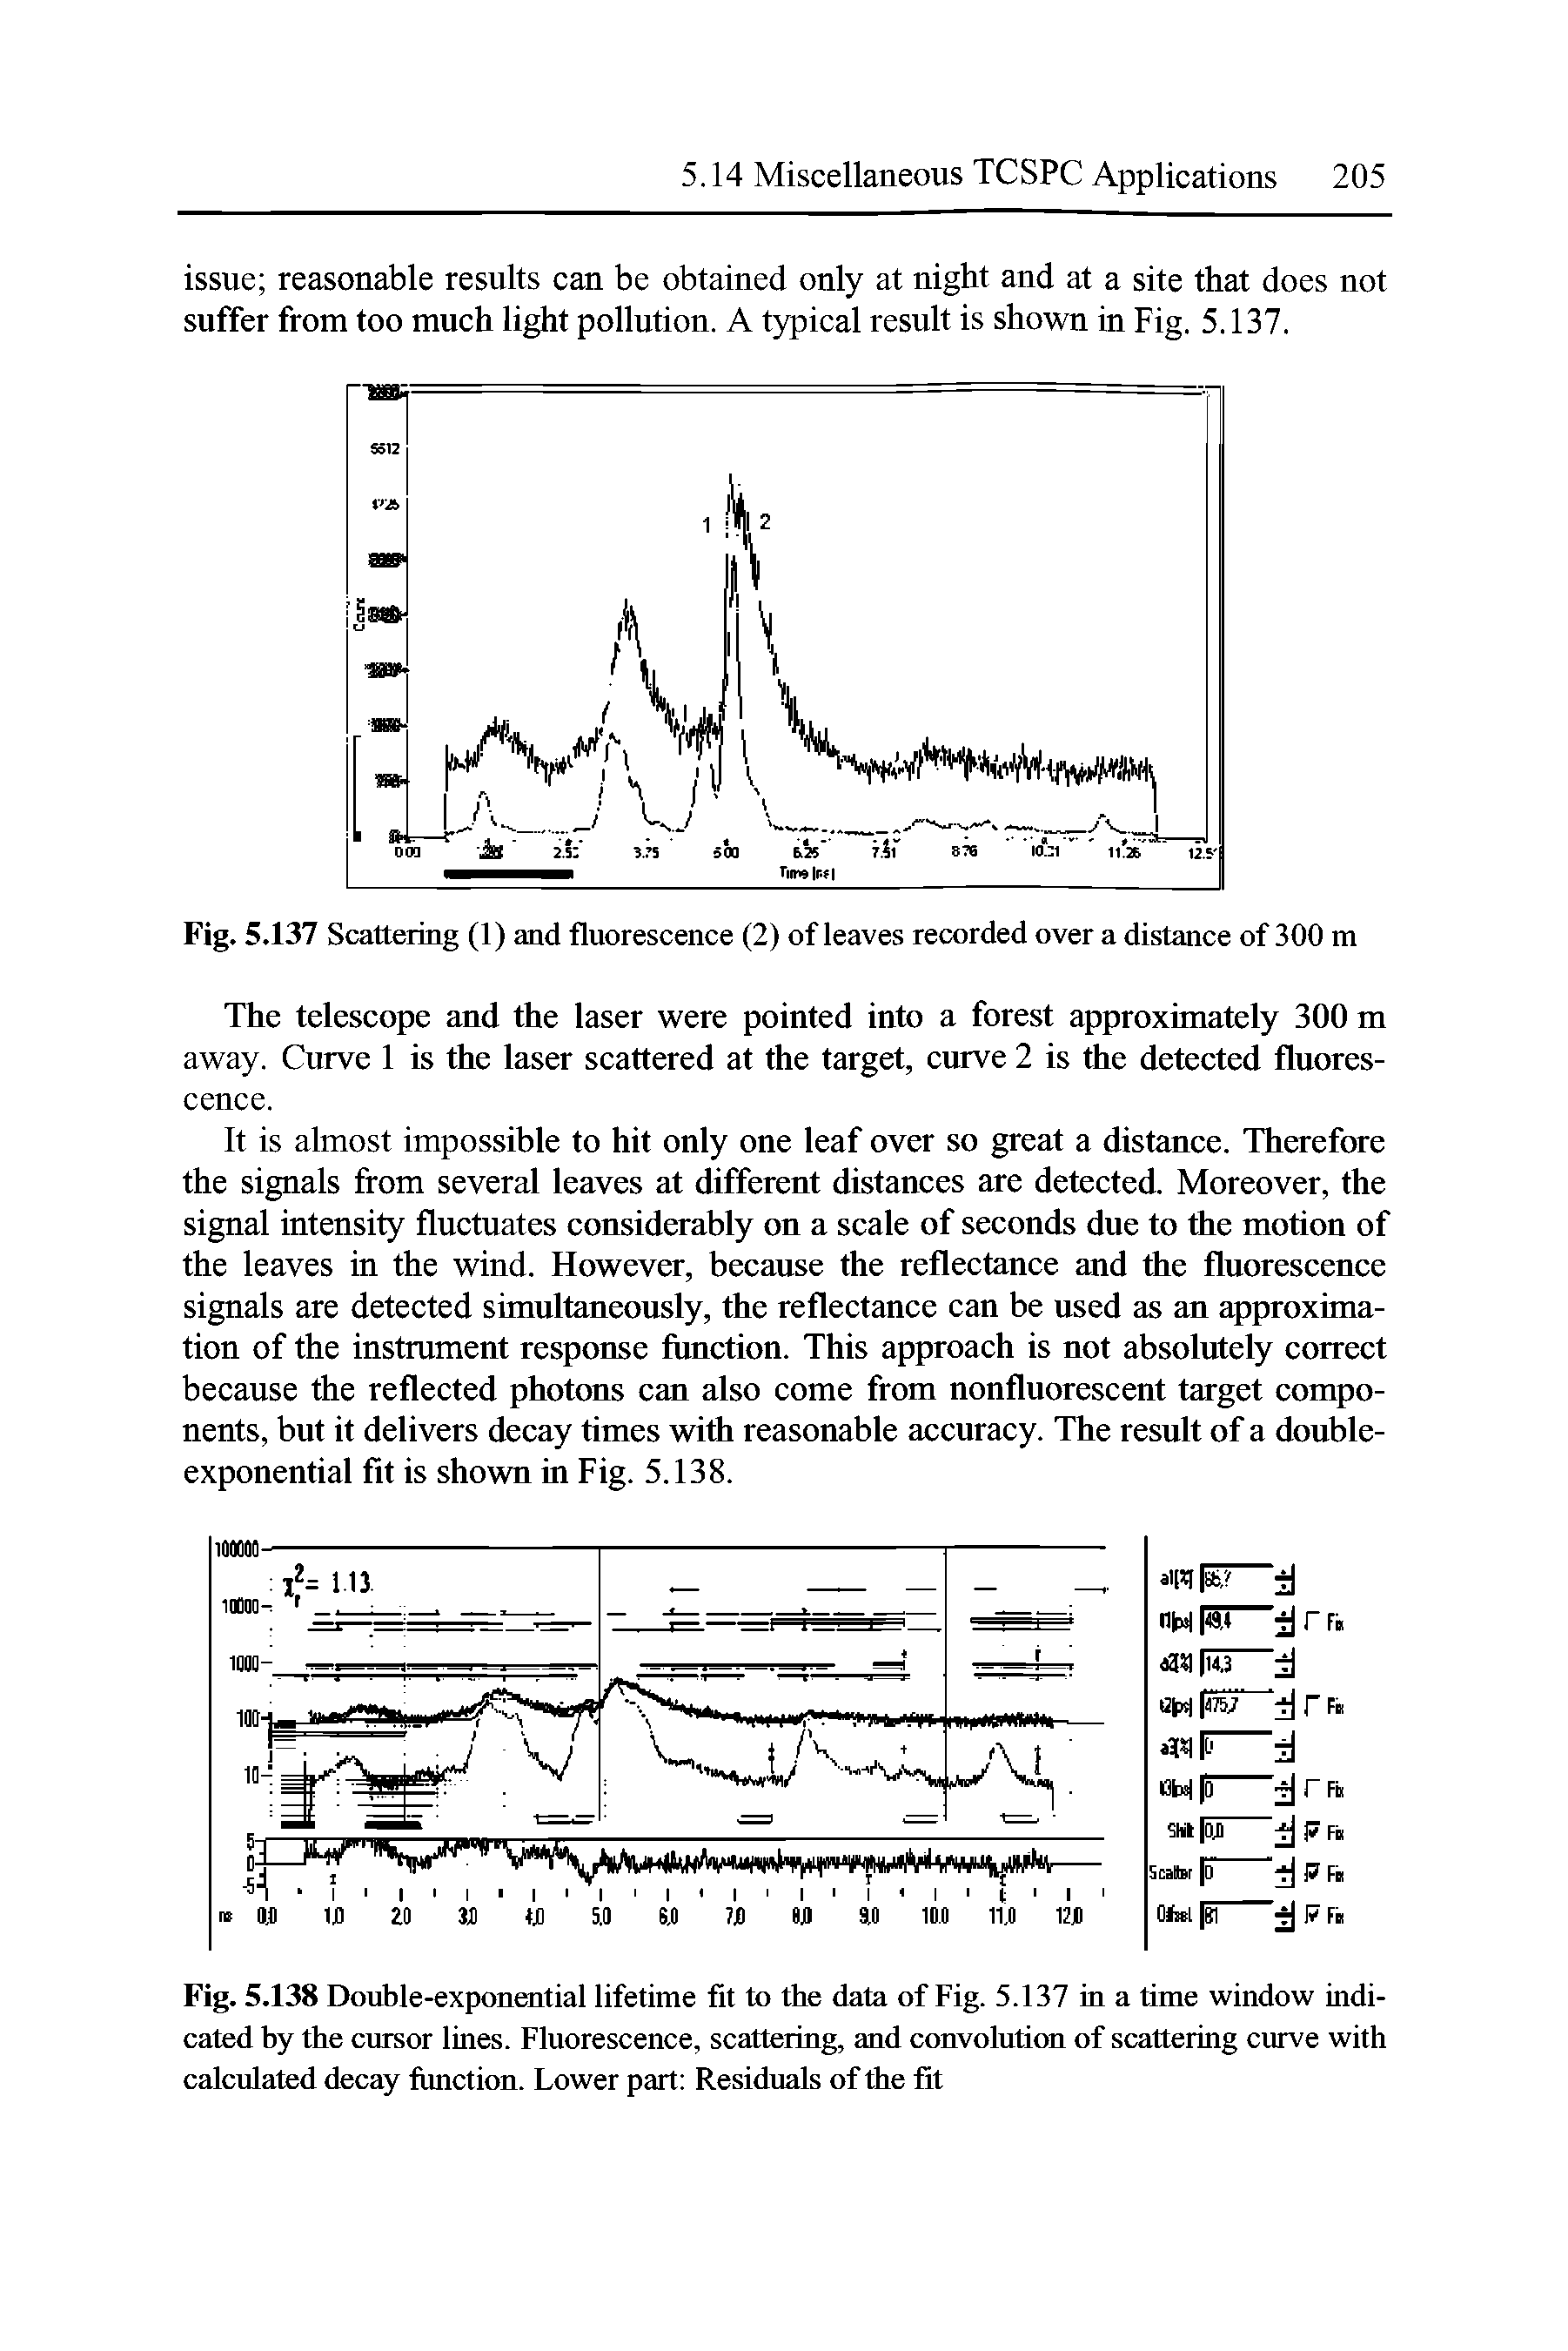 Fig. 5.138 Double-exponential lifetime fit to the data of Fig. 5.137 in a time window indicated by the cursor lines. Fluorescence, scattering, and convolution of scattering curve with calculated decay function. Lower part Residuals of the fit...